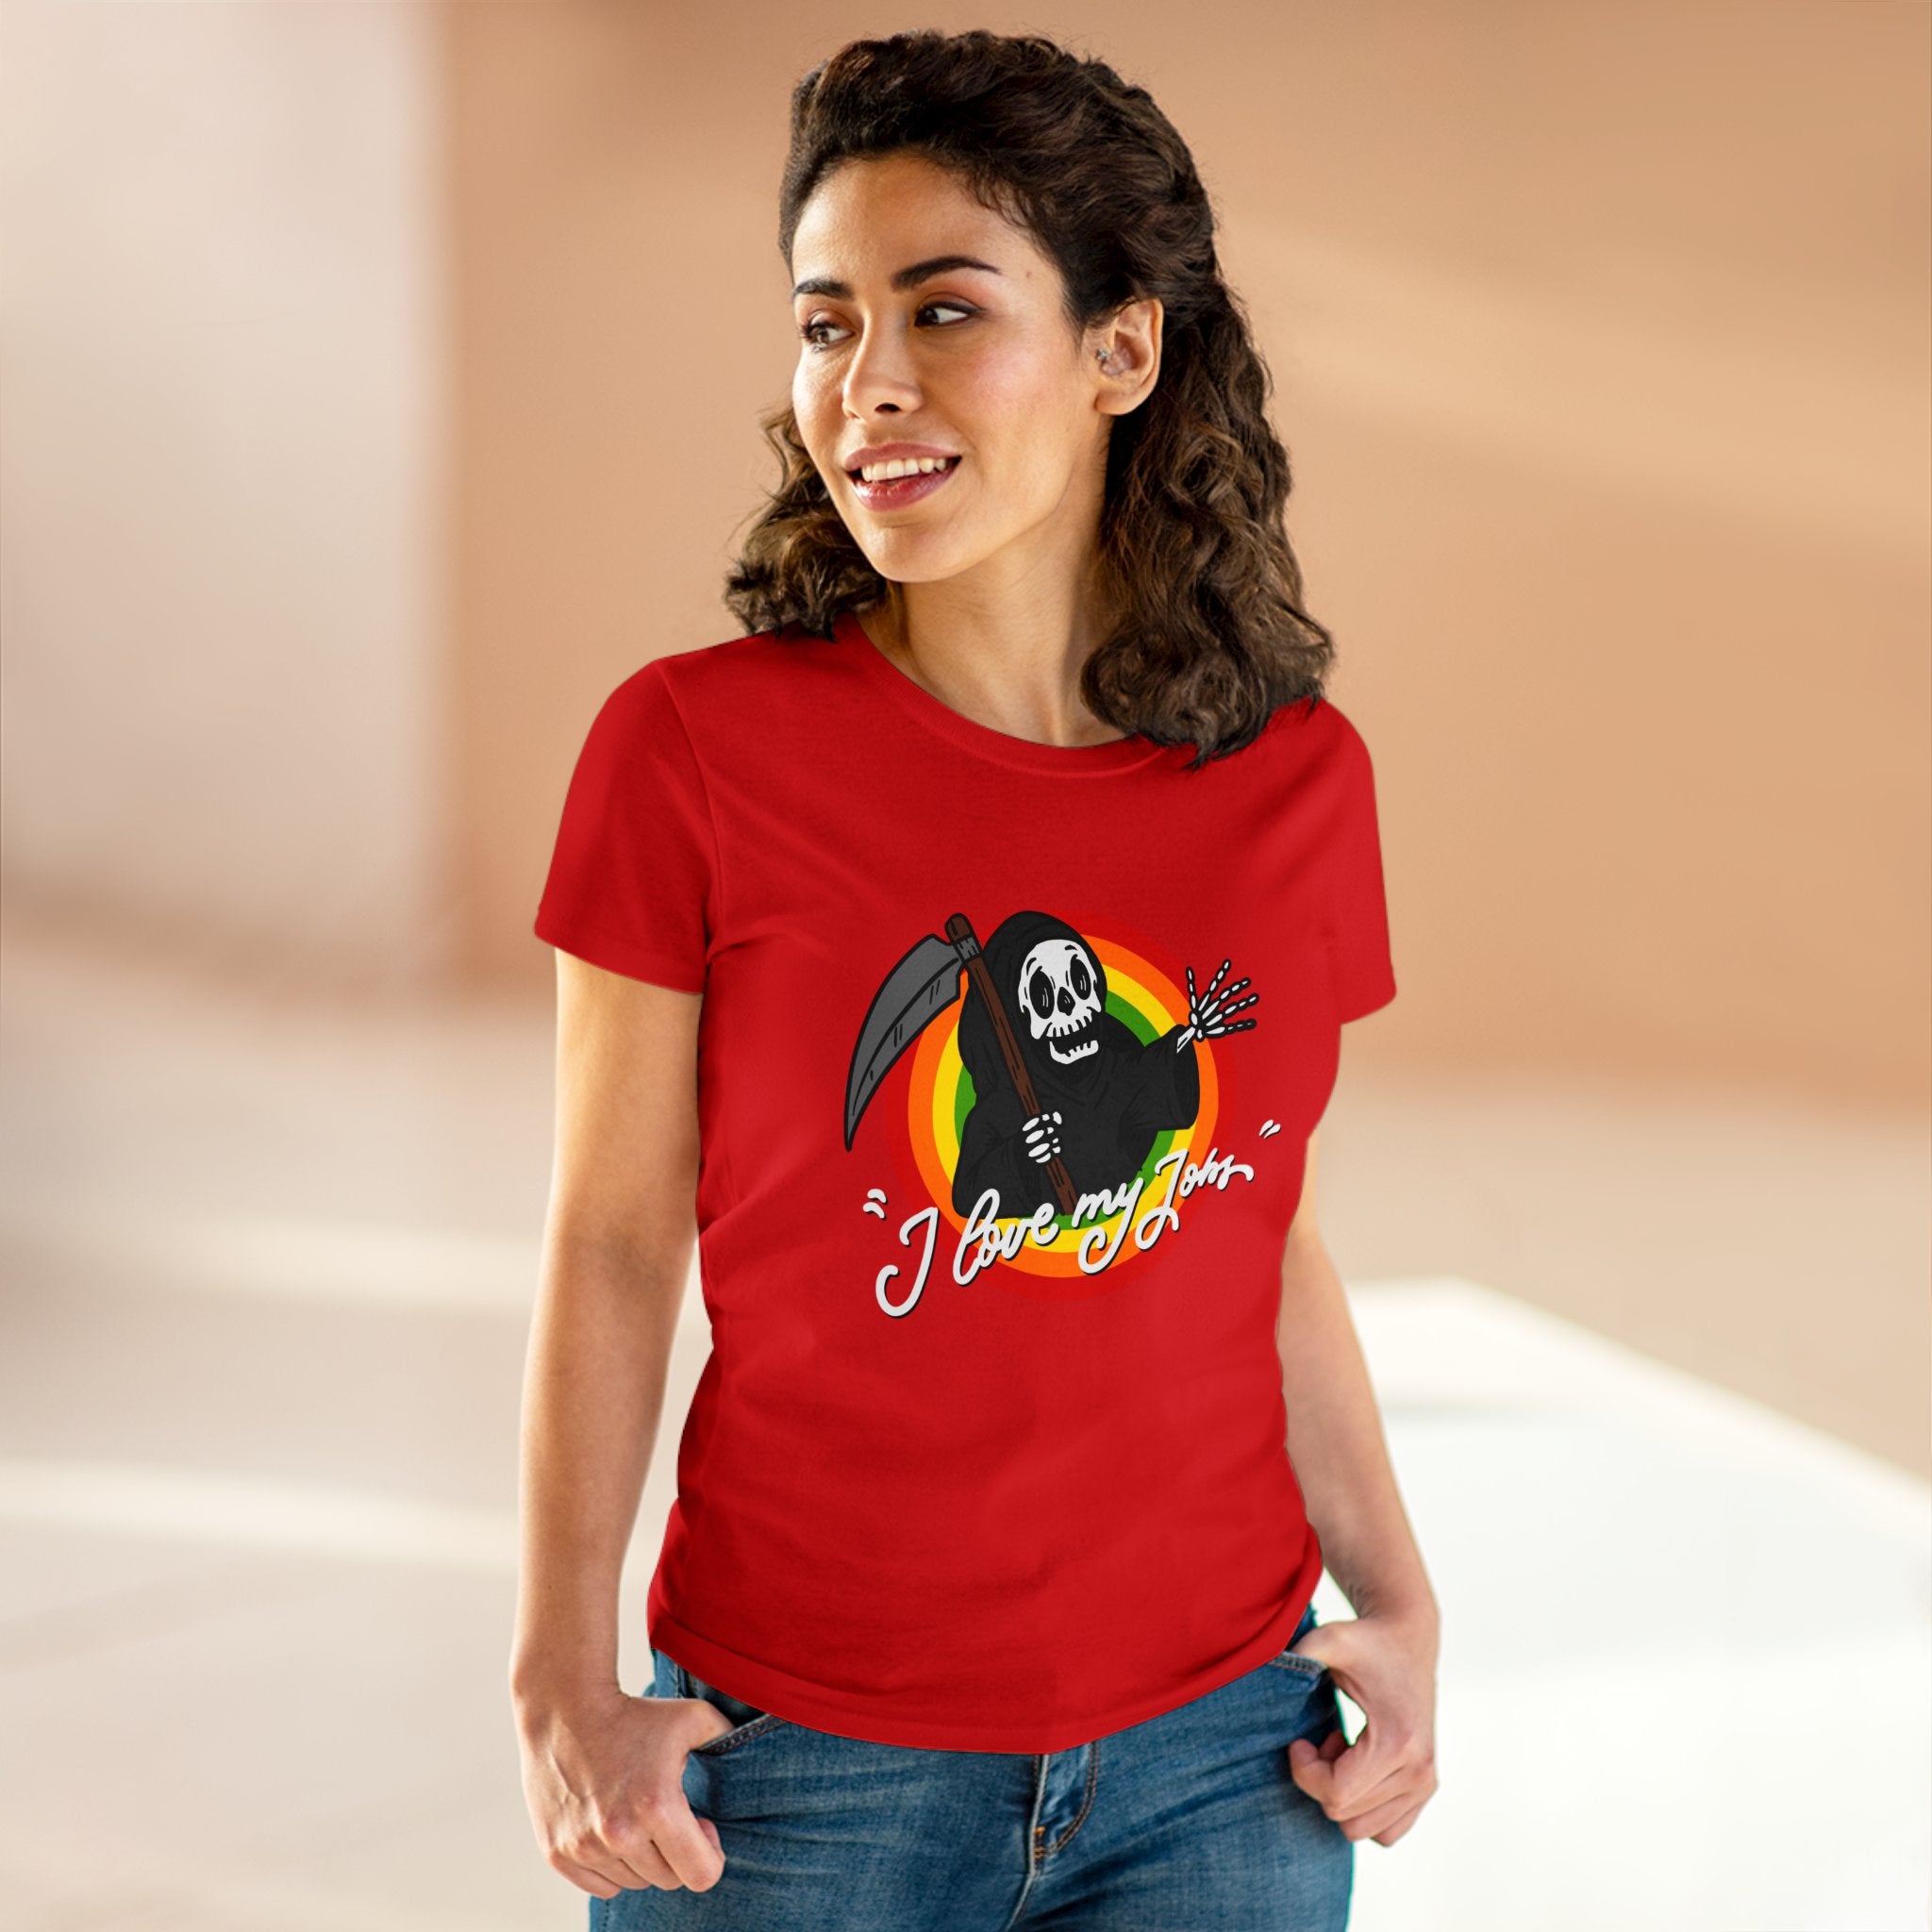 A person is wearing a red T-shirt featuring a cartoon skeleton with a scythe and the text "I love my job." This Love My Jobs - Women's Tee is made from soft, comfortable cotton. The background is blurred and features warm tones.